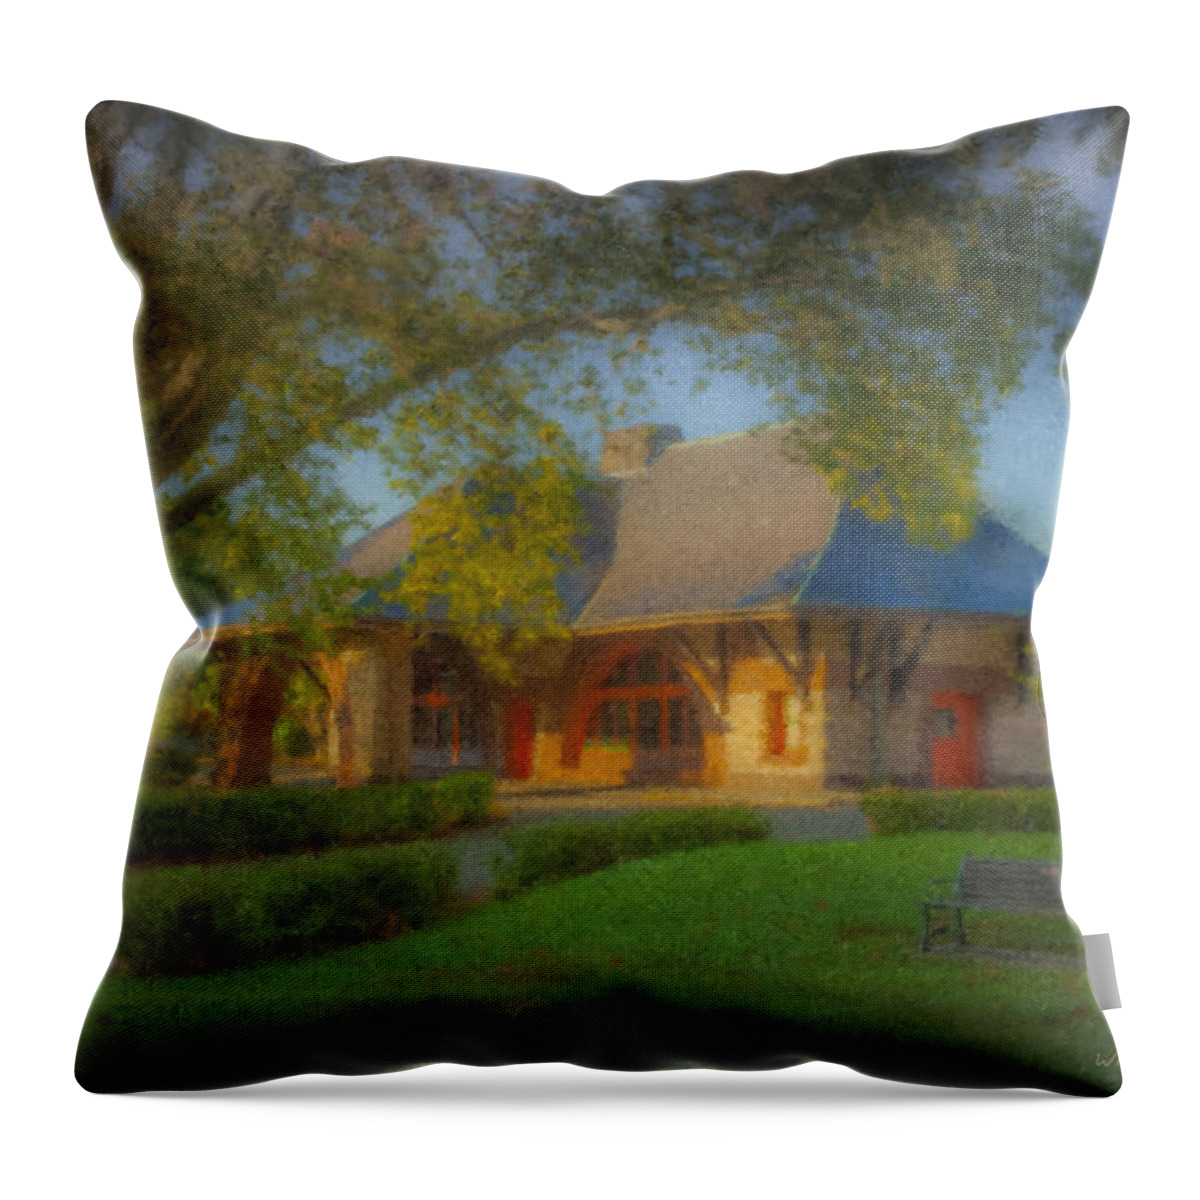 North Easton Throw Pillow featuring the painting North Easton Train Station by Bill McEntee